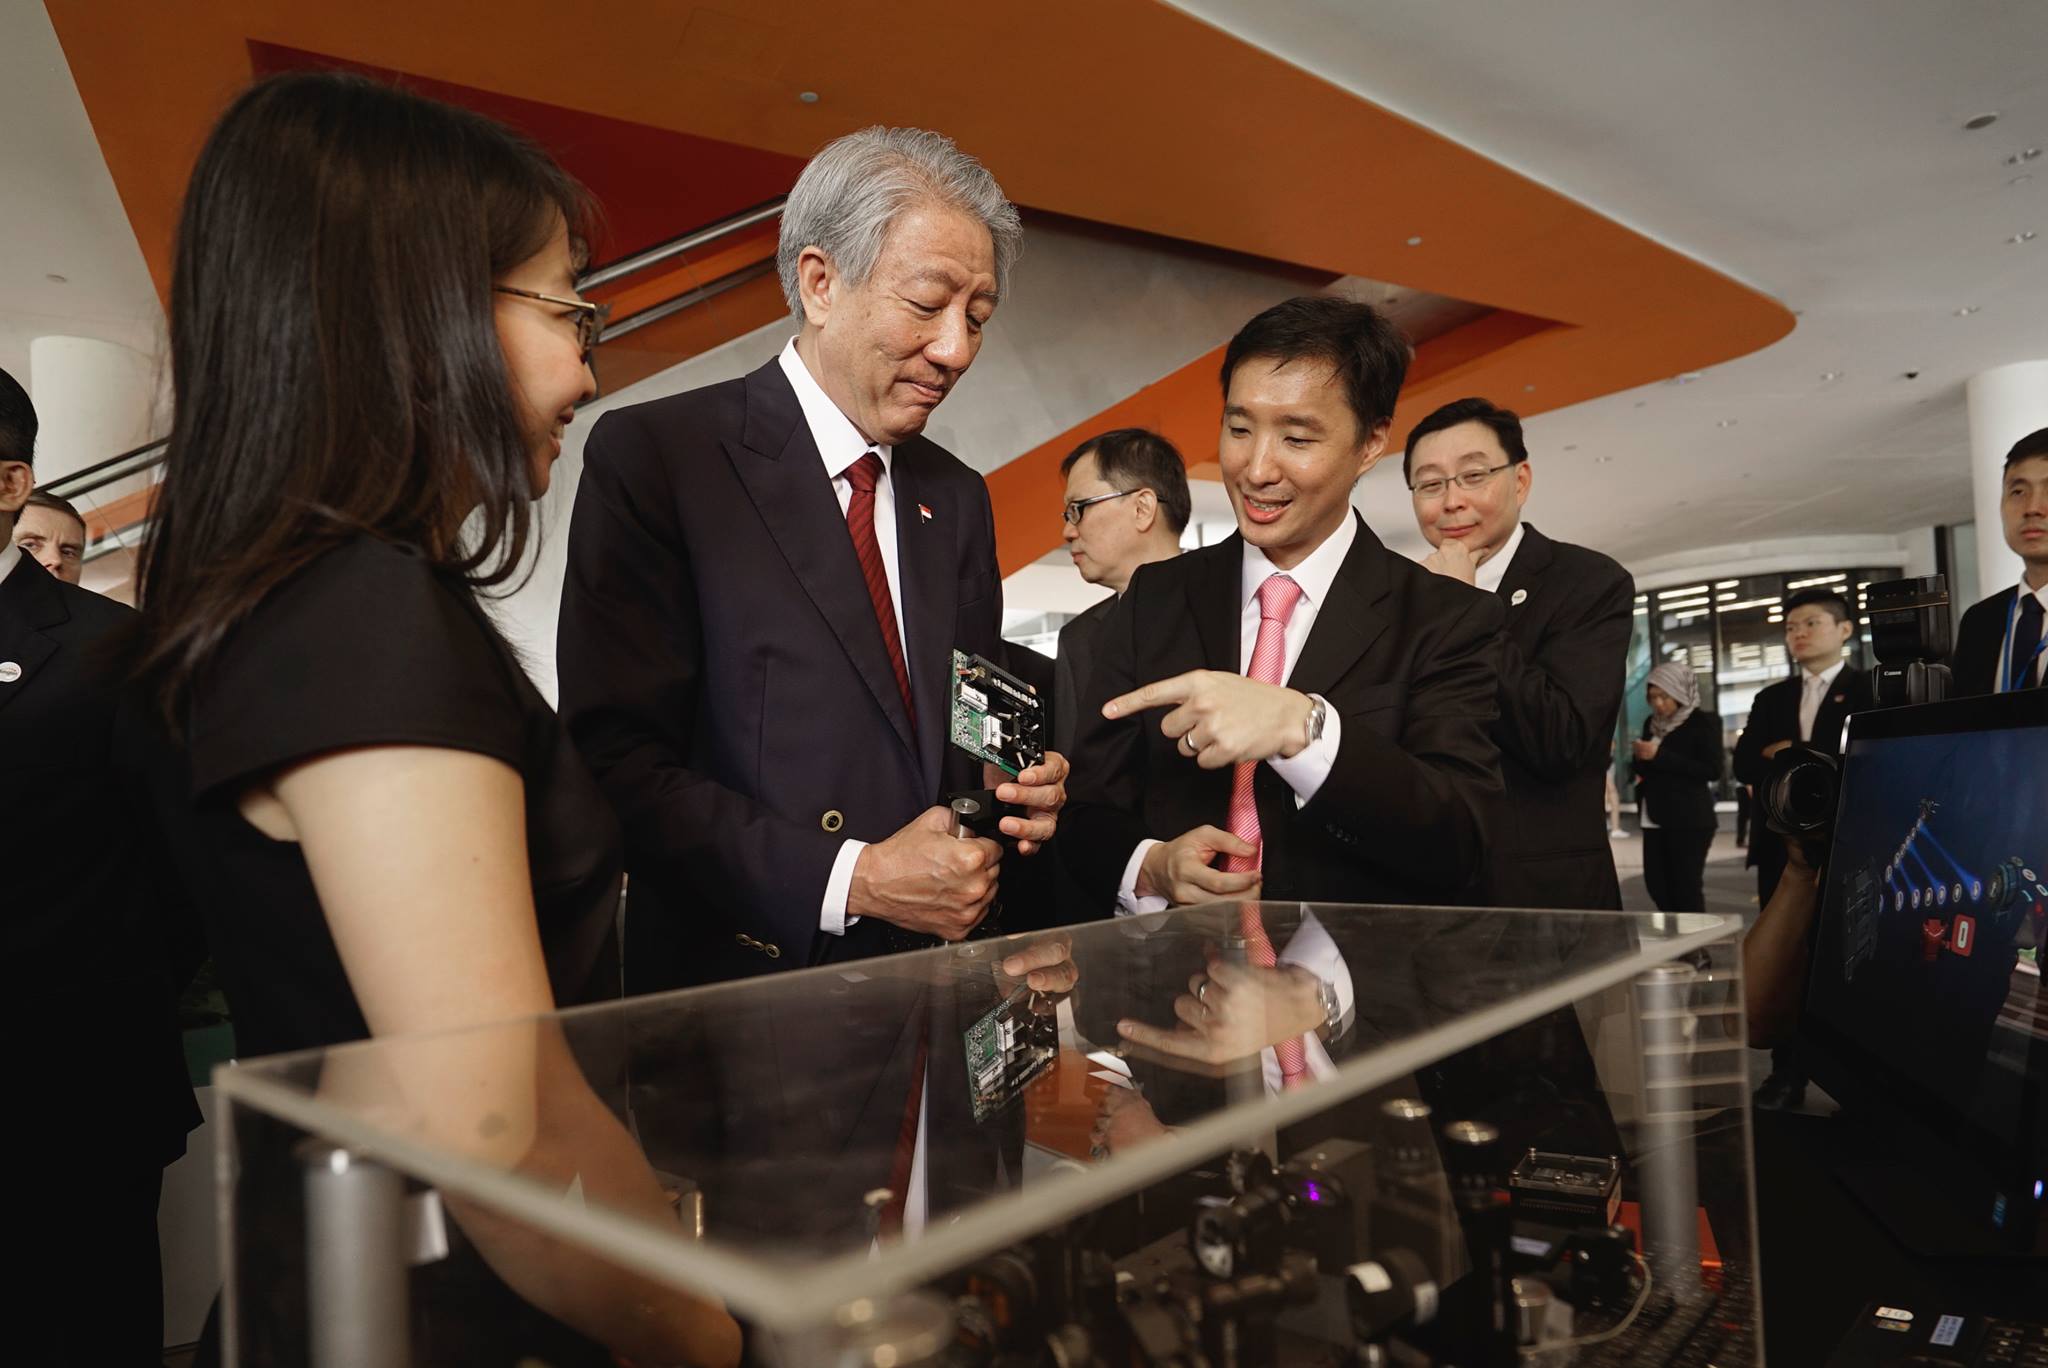 CQT's Alexander Ling presenting a QKD kit to Singapore Deputy Prime Minister Mr Teo Chee Hean